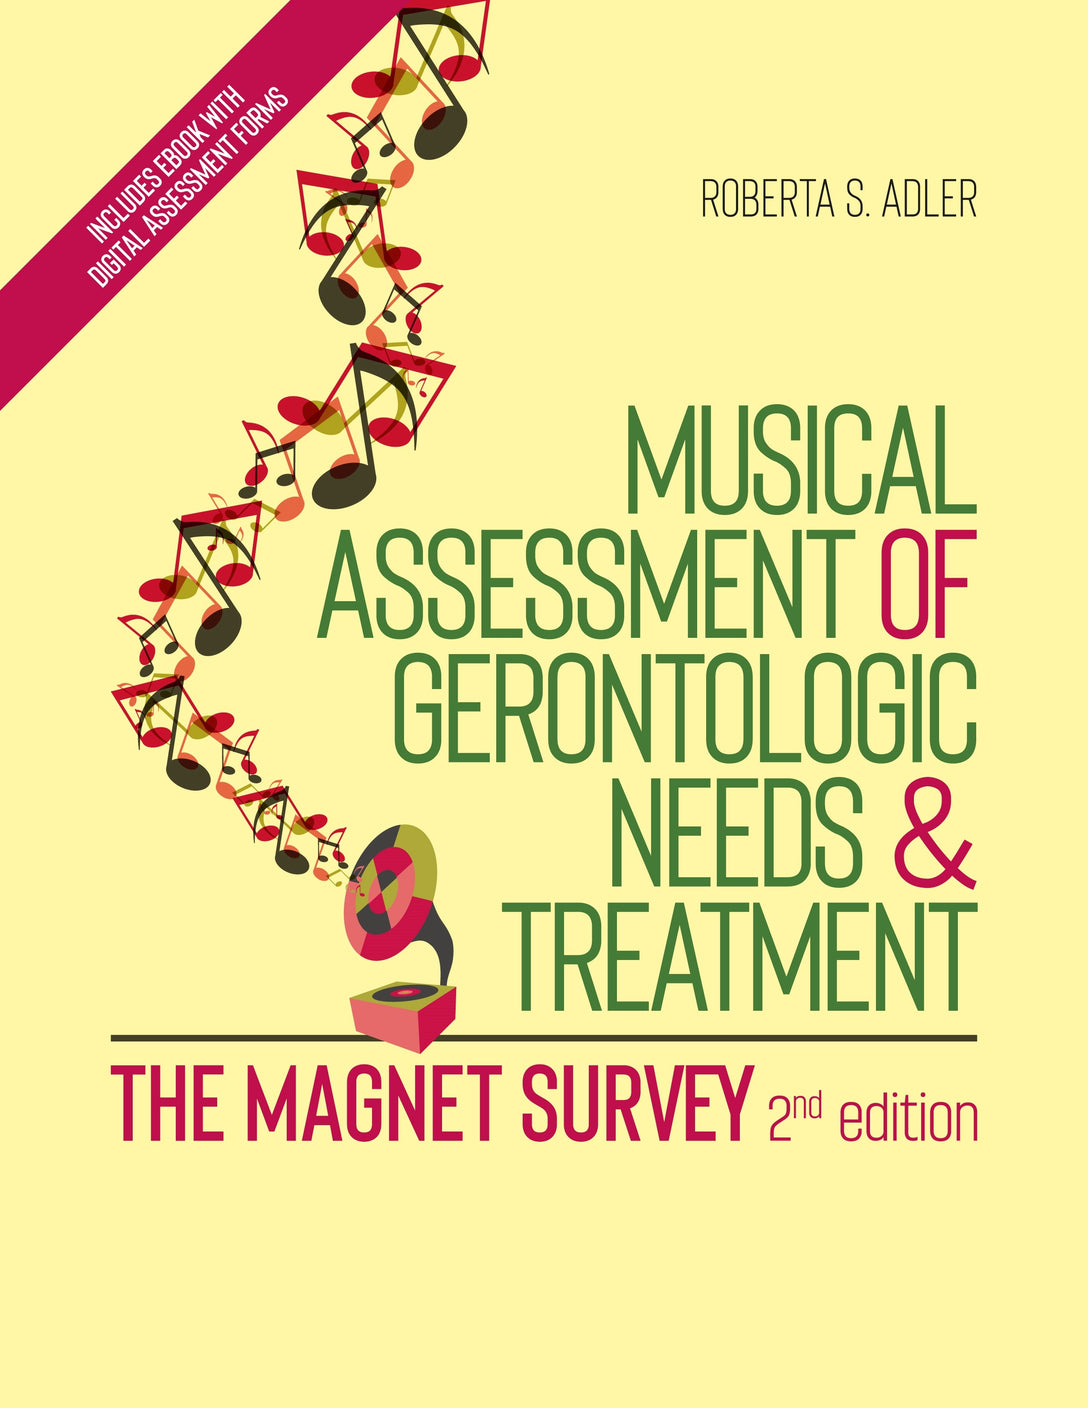 Musical Assessment of Gerontologic Needs and Treatment - The MAGNET Survey by Roberta S. Adler